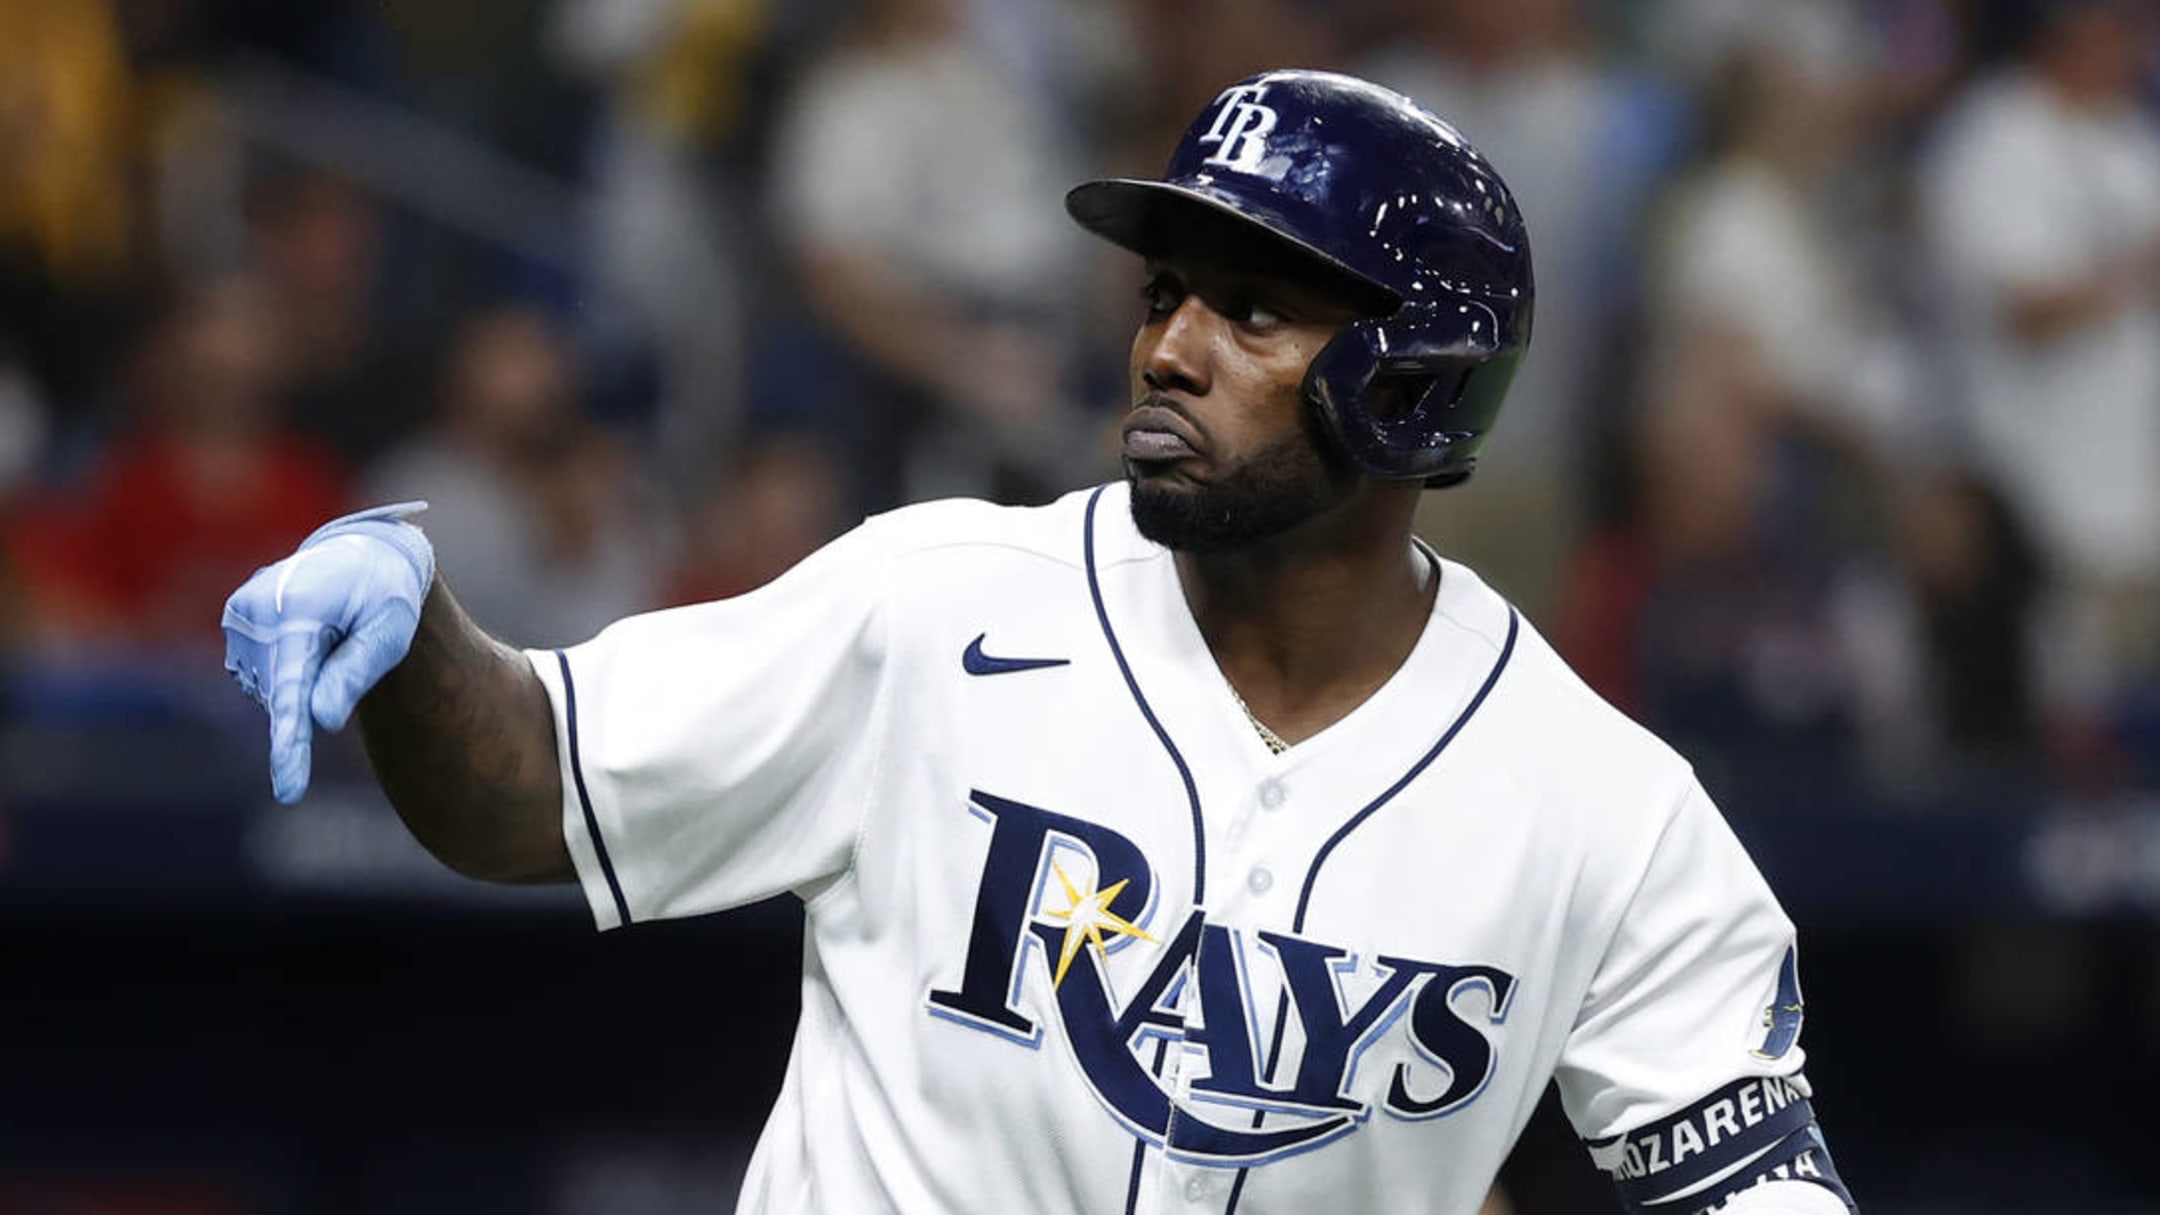 Randy Arozarena of the Rays is the MLB playoffs' breakout star